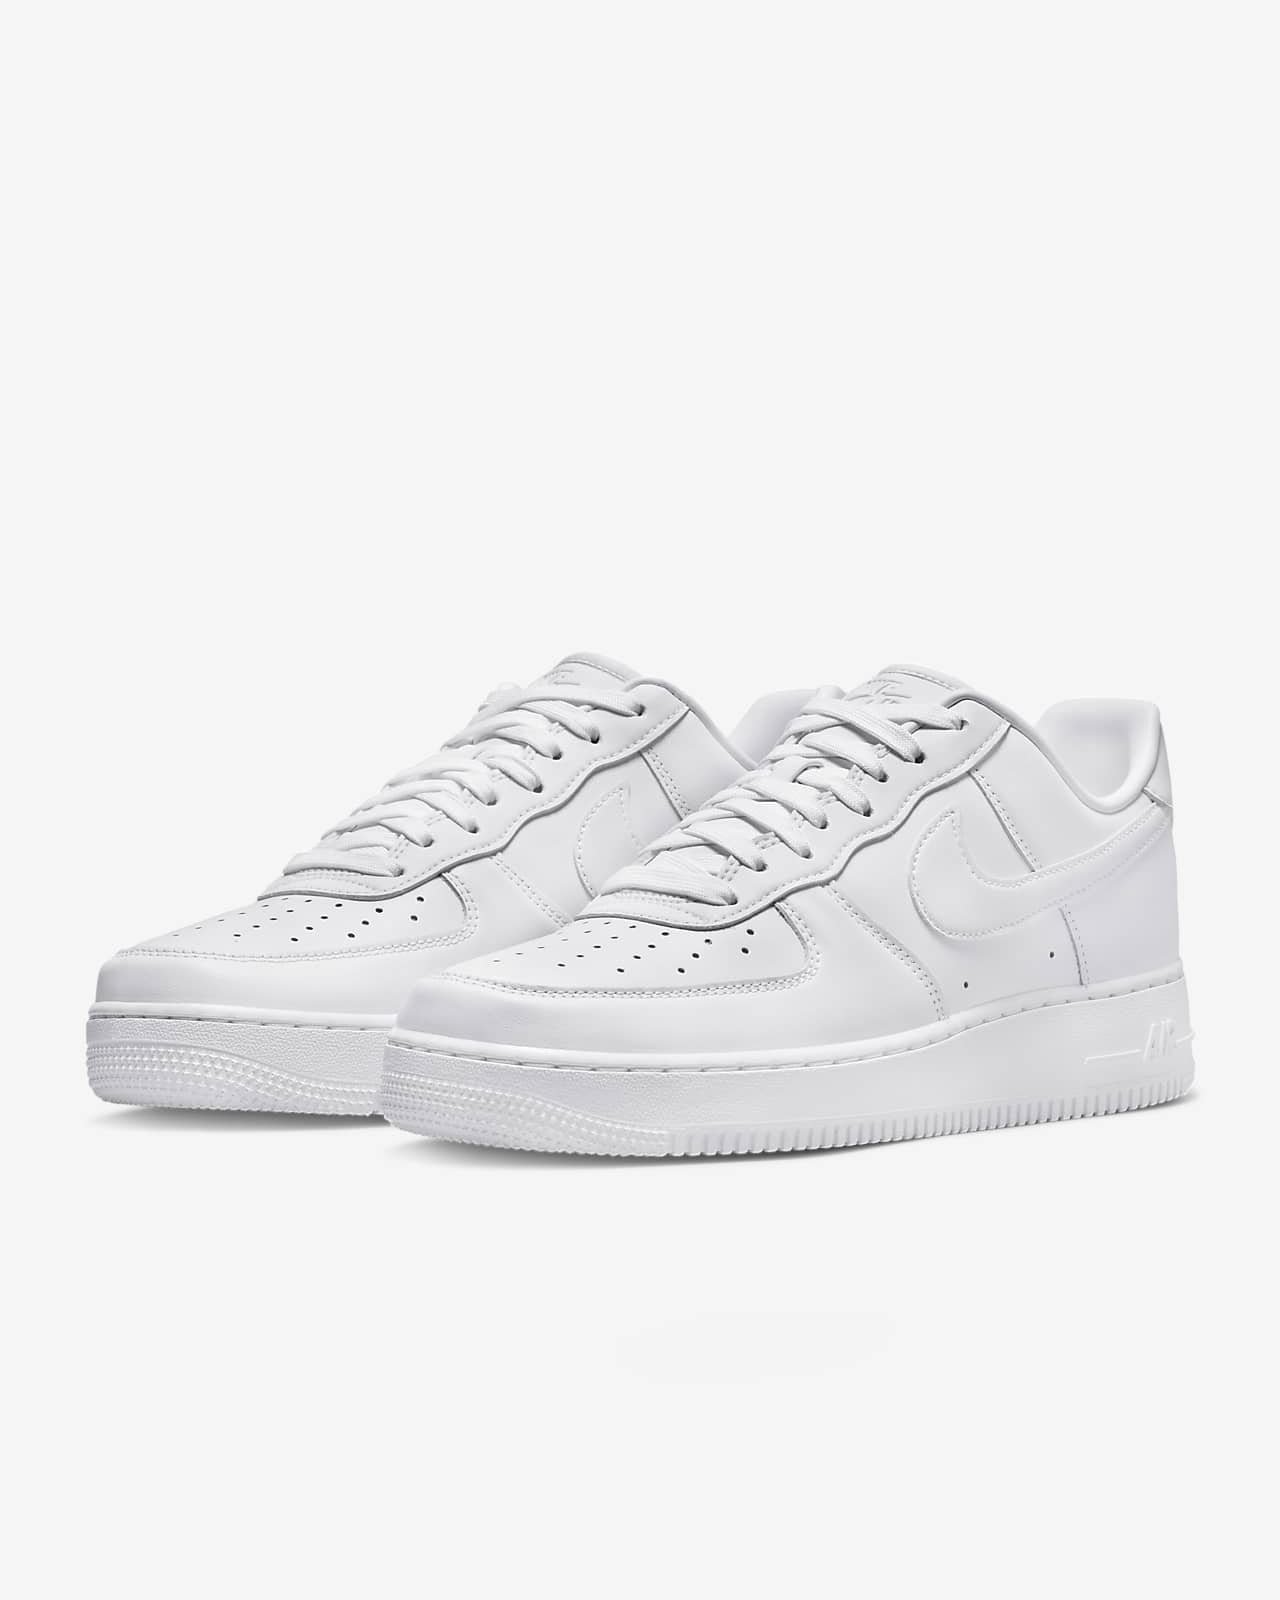 Men's Nike Air Force 1 '07 LV8 Certified Fresh Casual Shoes